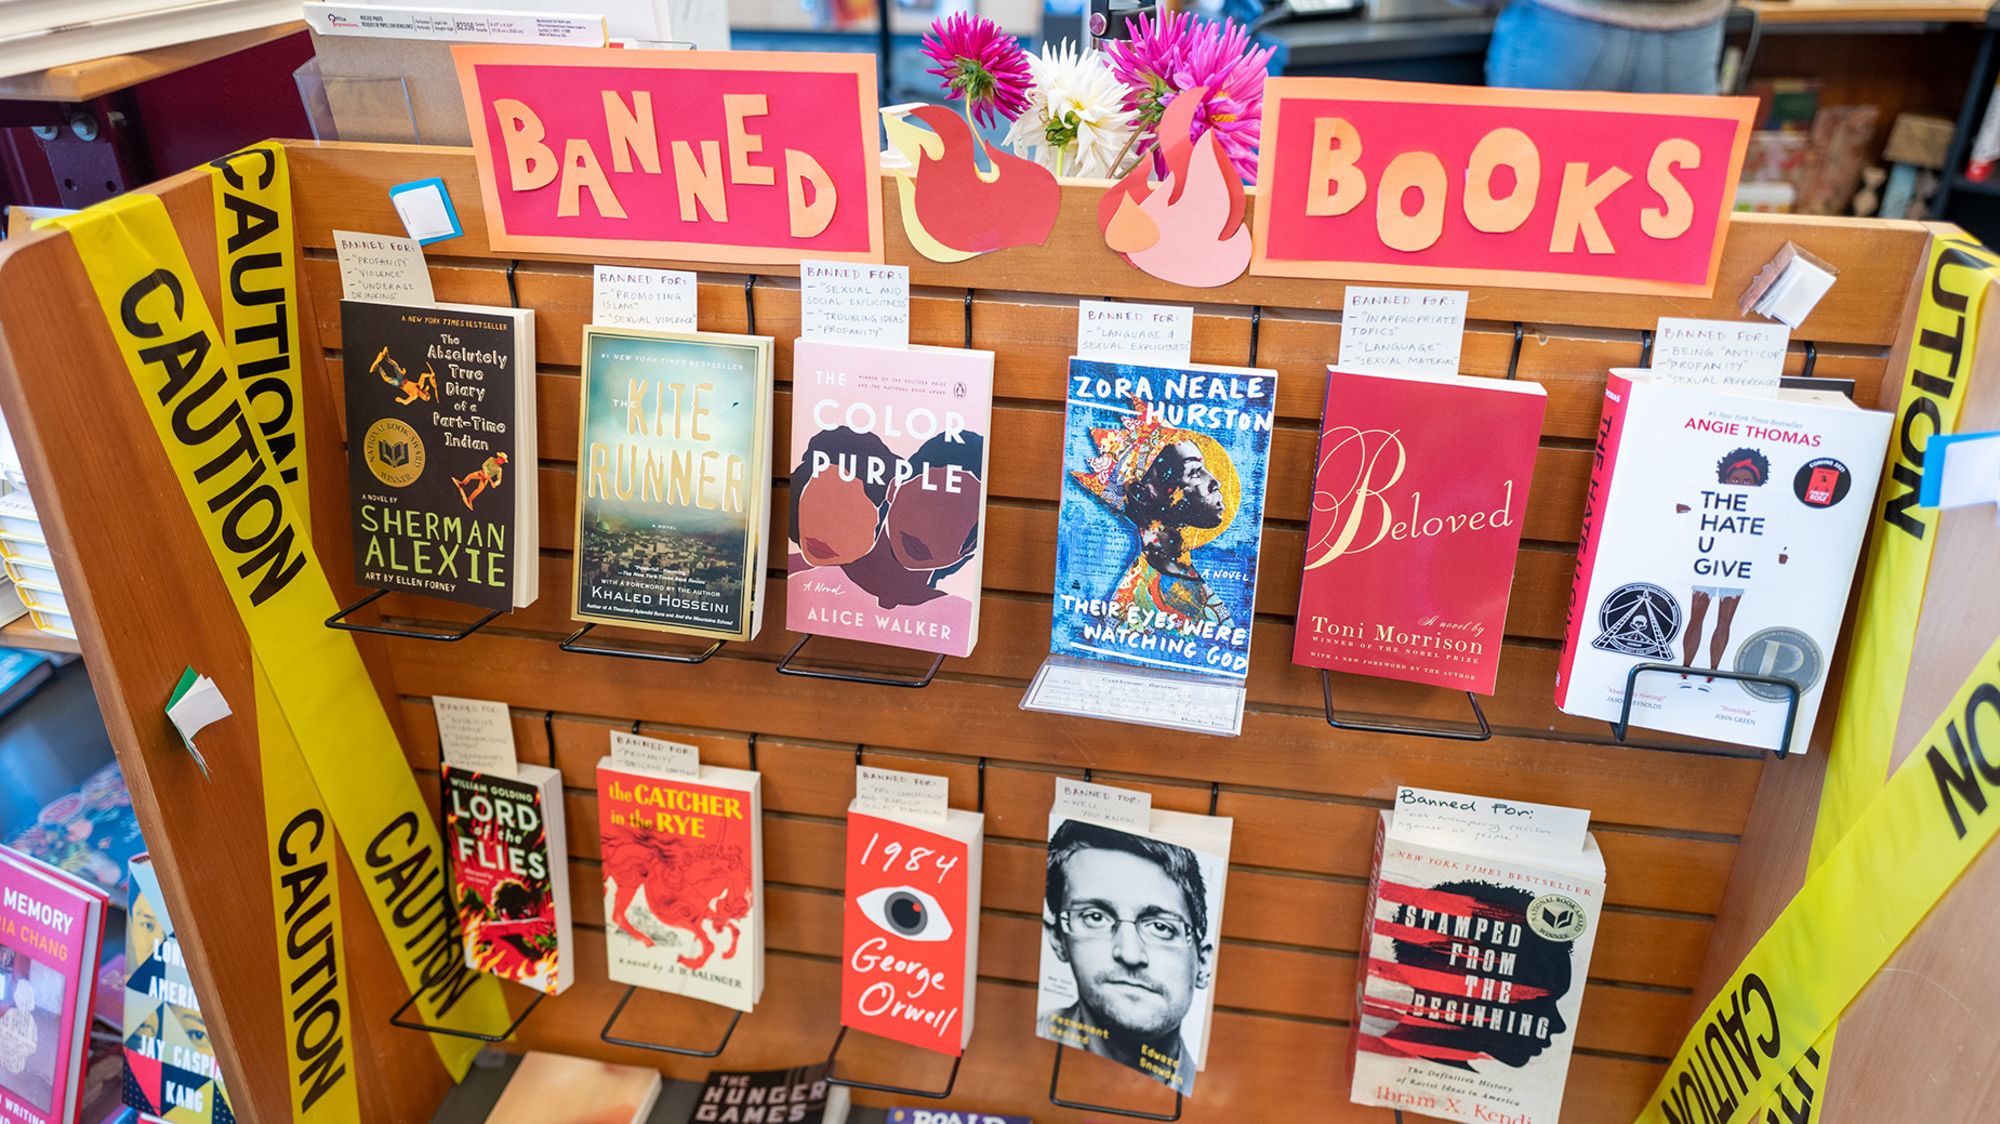 Display of banned books or censored books at Books Inc independent bookstore in Alameda, California, October 16, 2021.